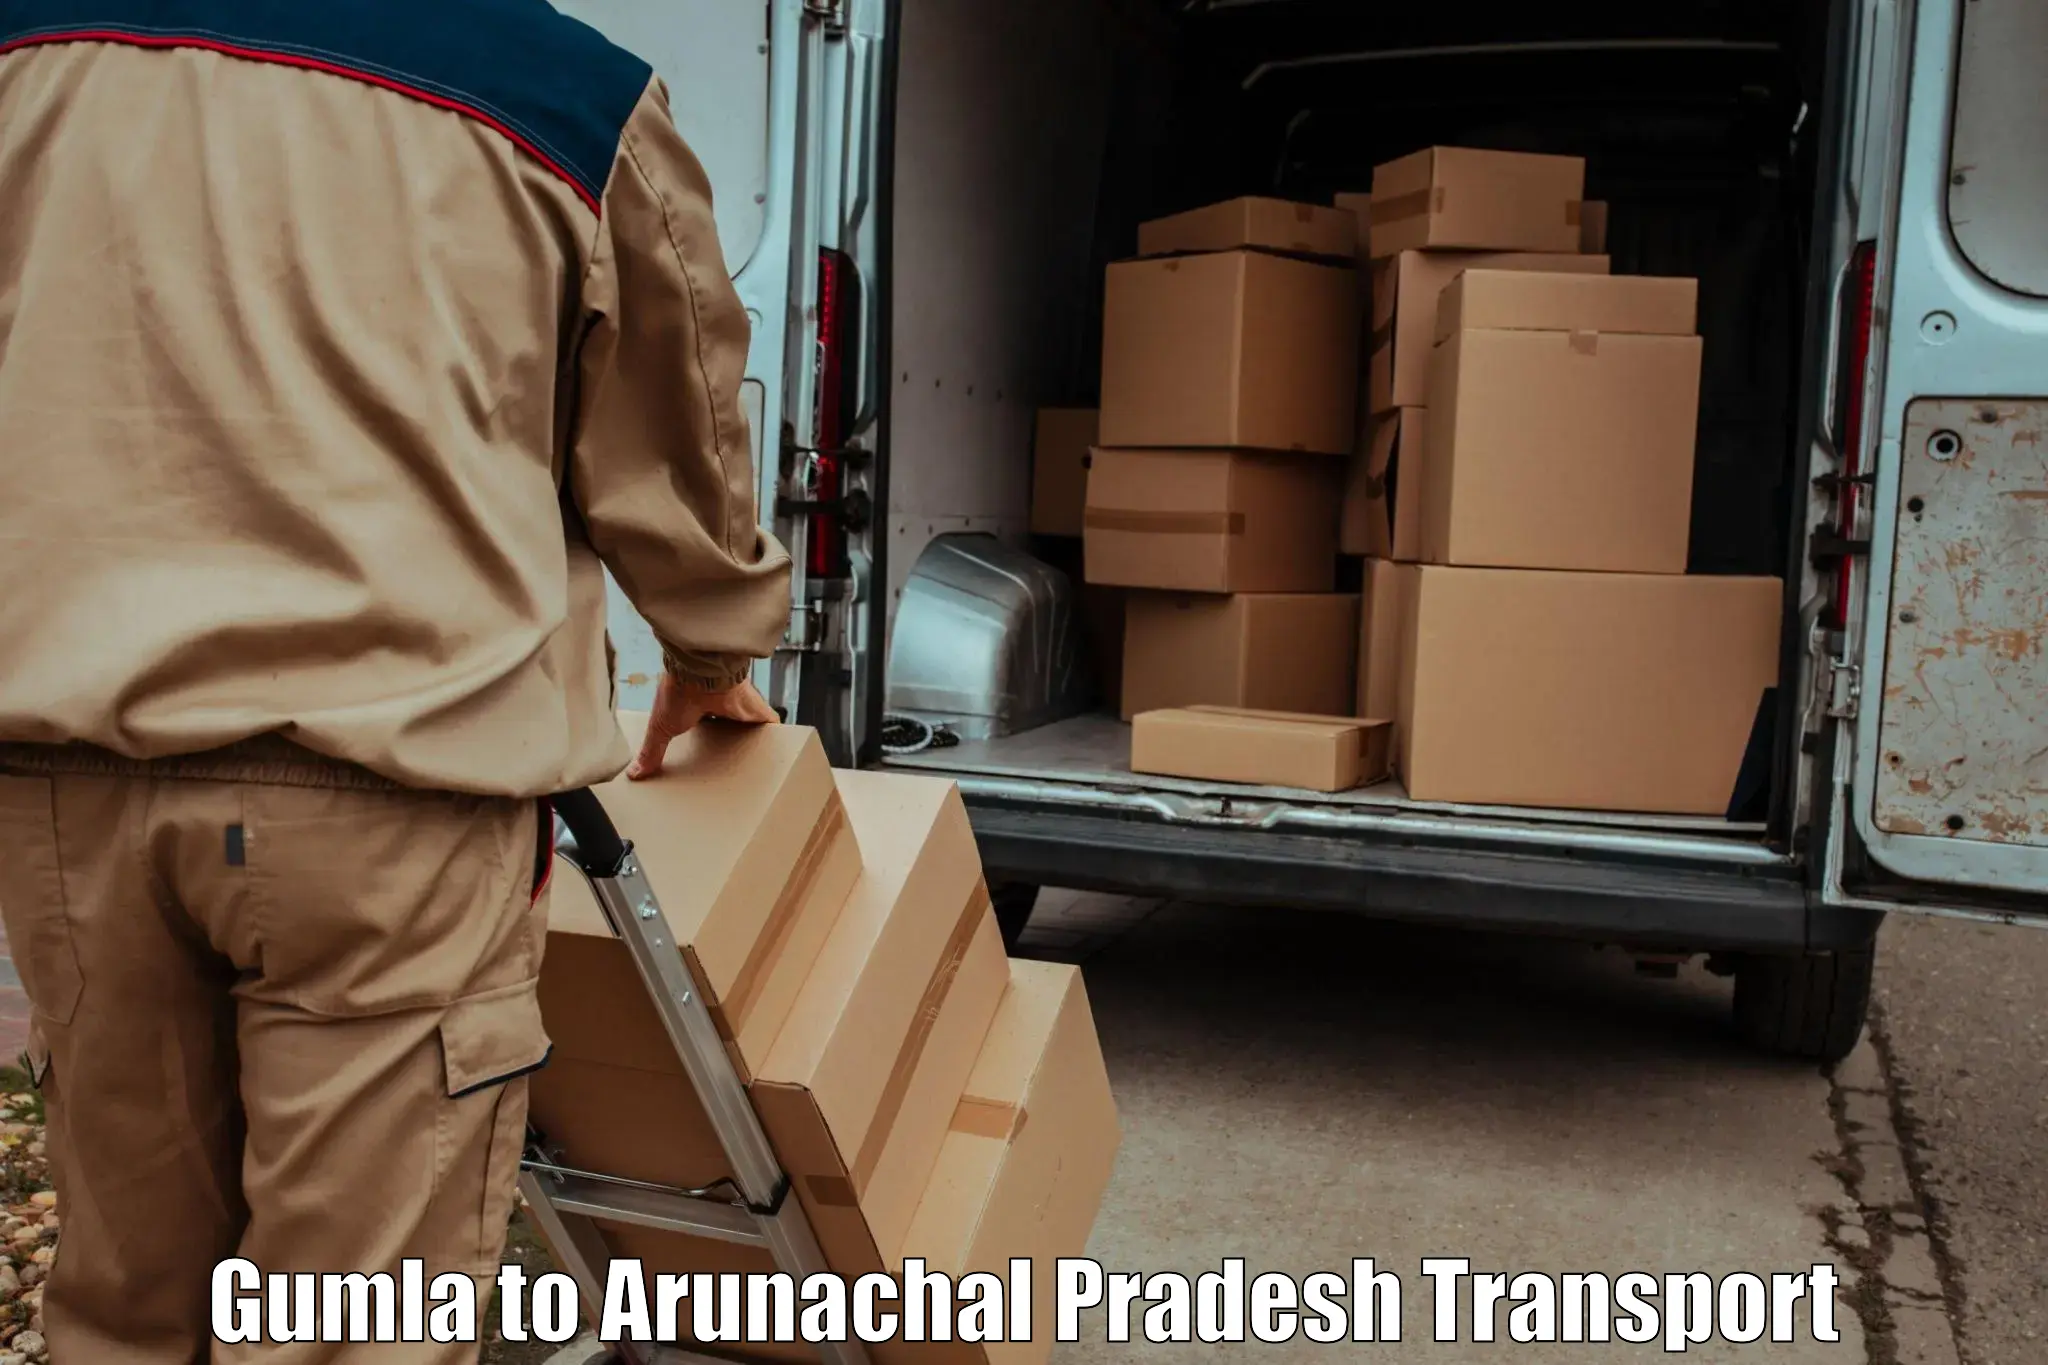 Luggage transport services in Gumla to Yingkiong